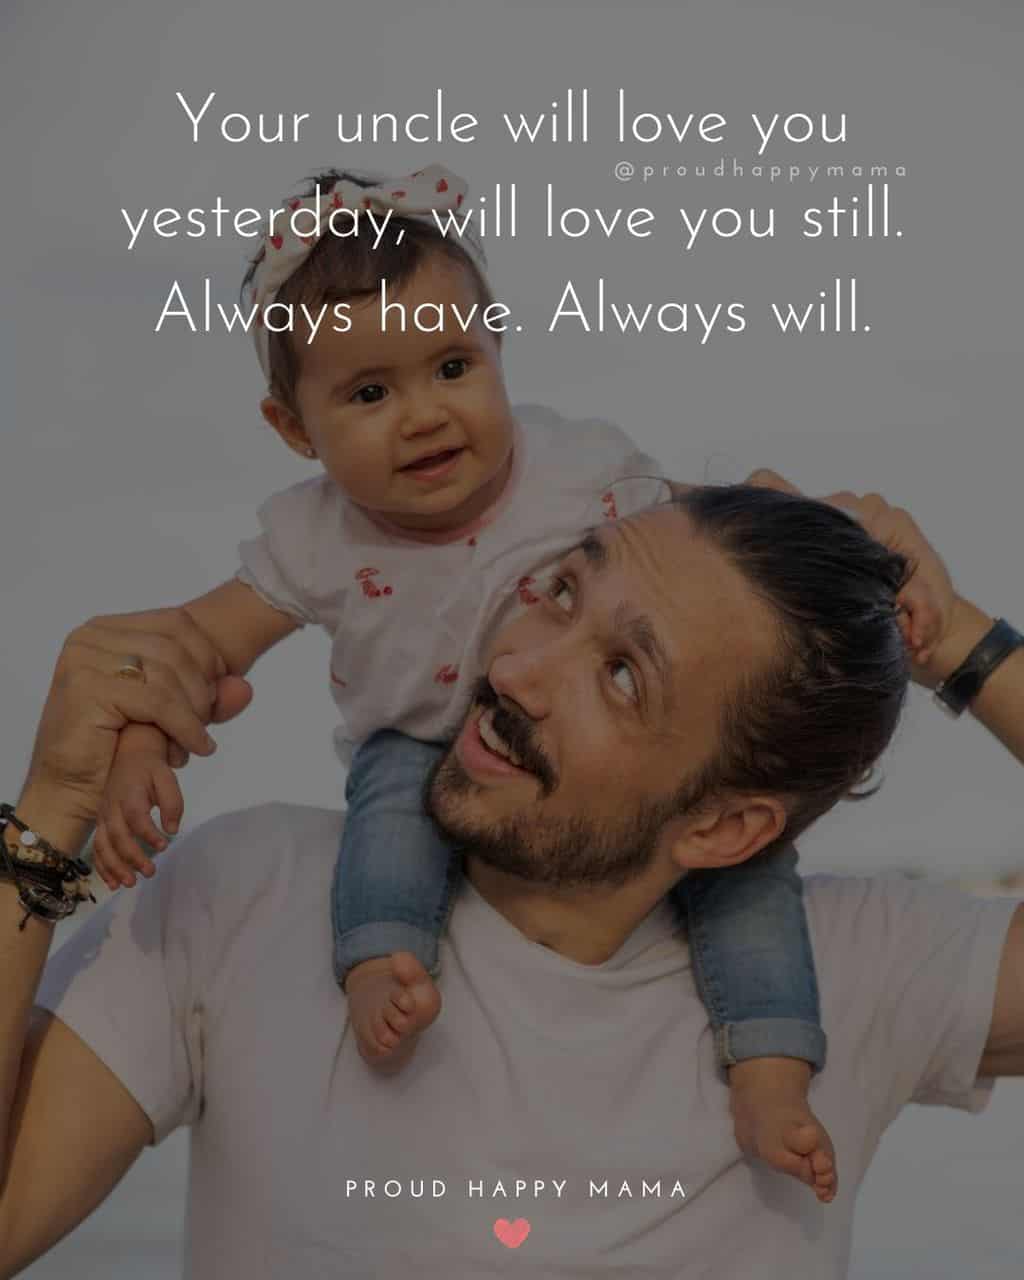 Niece Quotes - Your uncle will love you yesterday, will love you still. Always have. Always will.